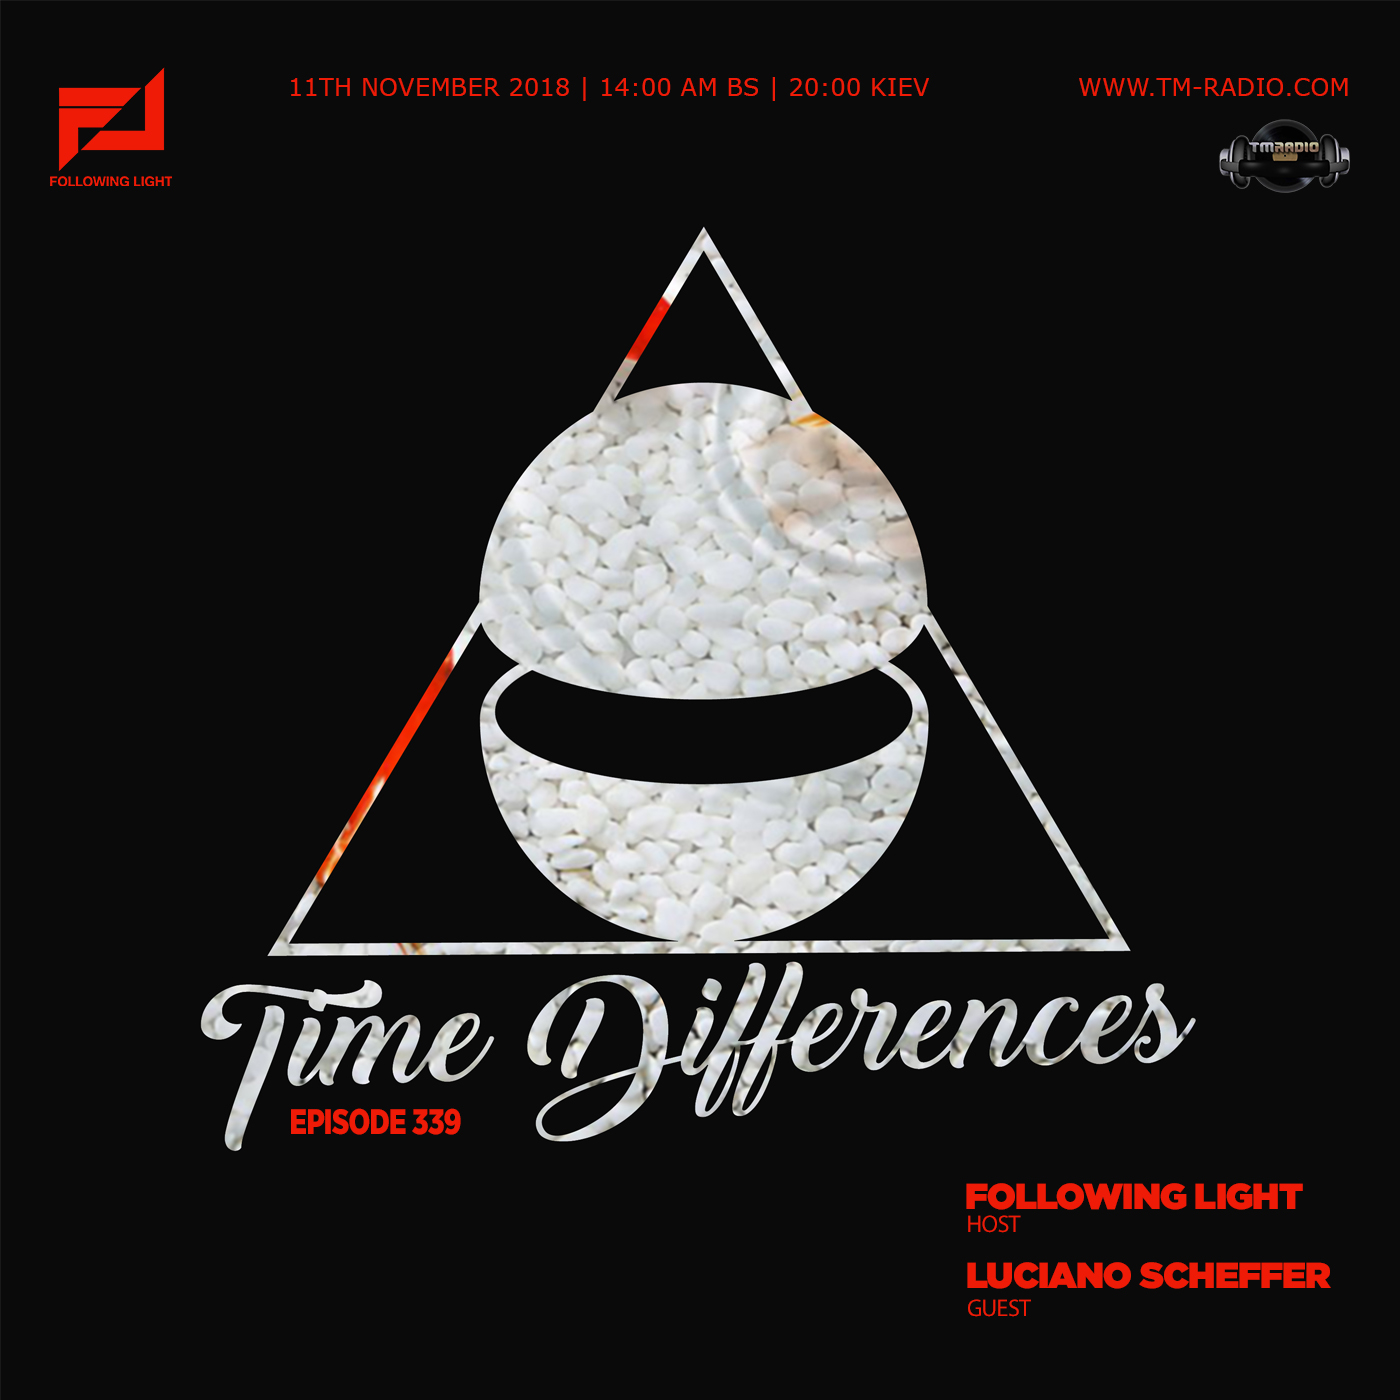 Time Differences :: Episode 339, with host Following Light and guest Luciano Scheffer (aired on November 11th, 2018) banner logo